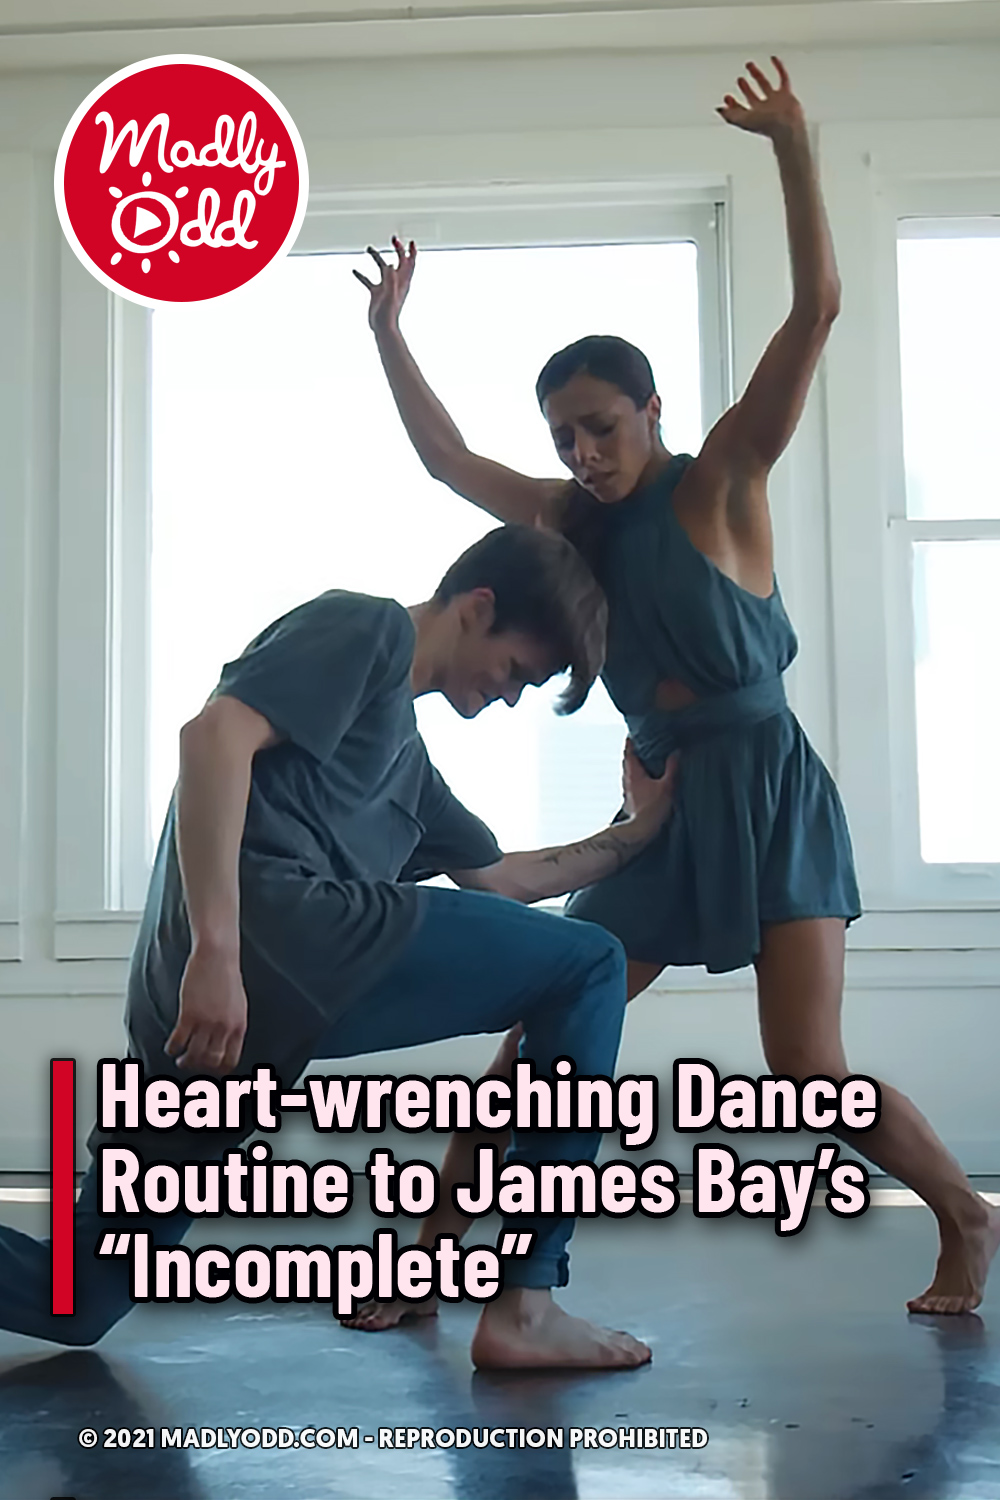 Heart-wrenching Dance Routine to James Bay’s “Incomplete”